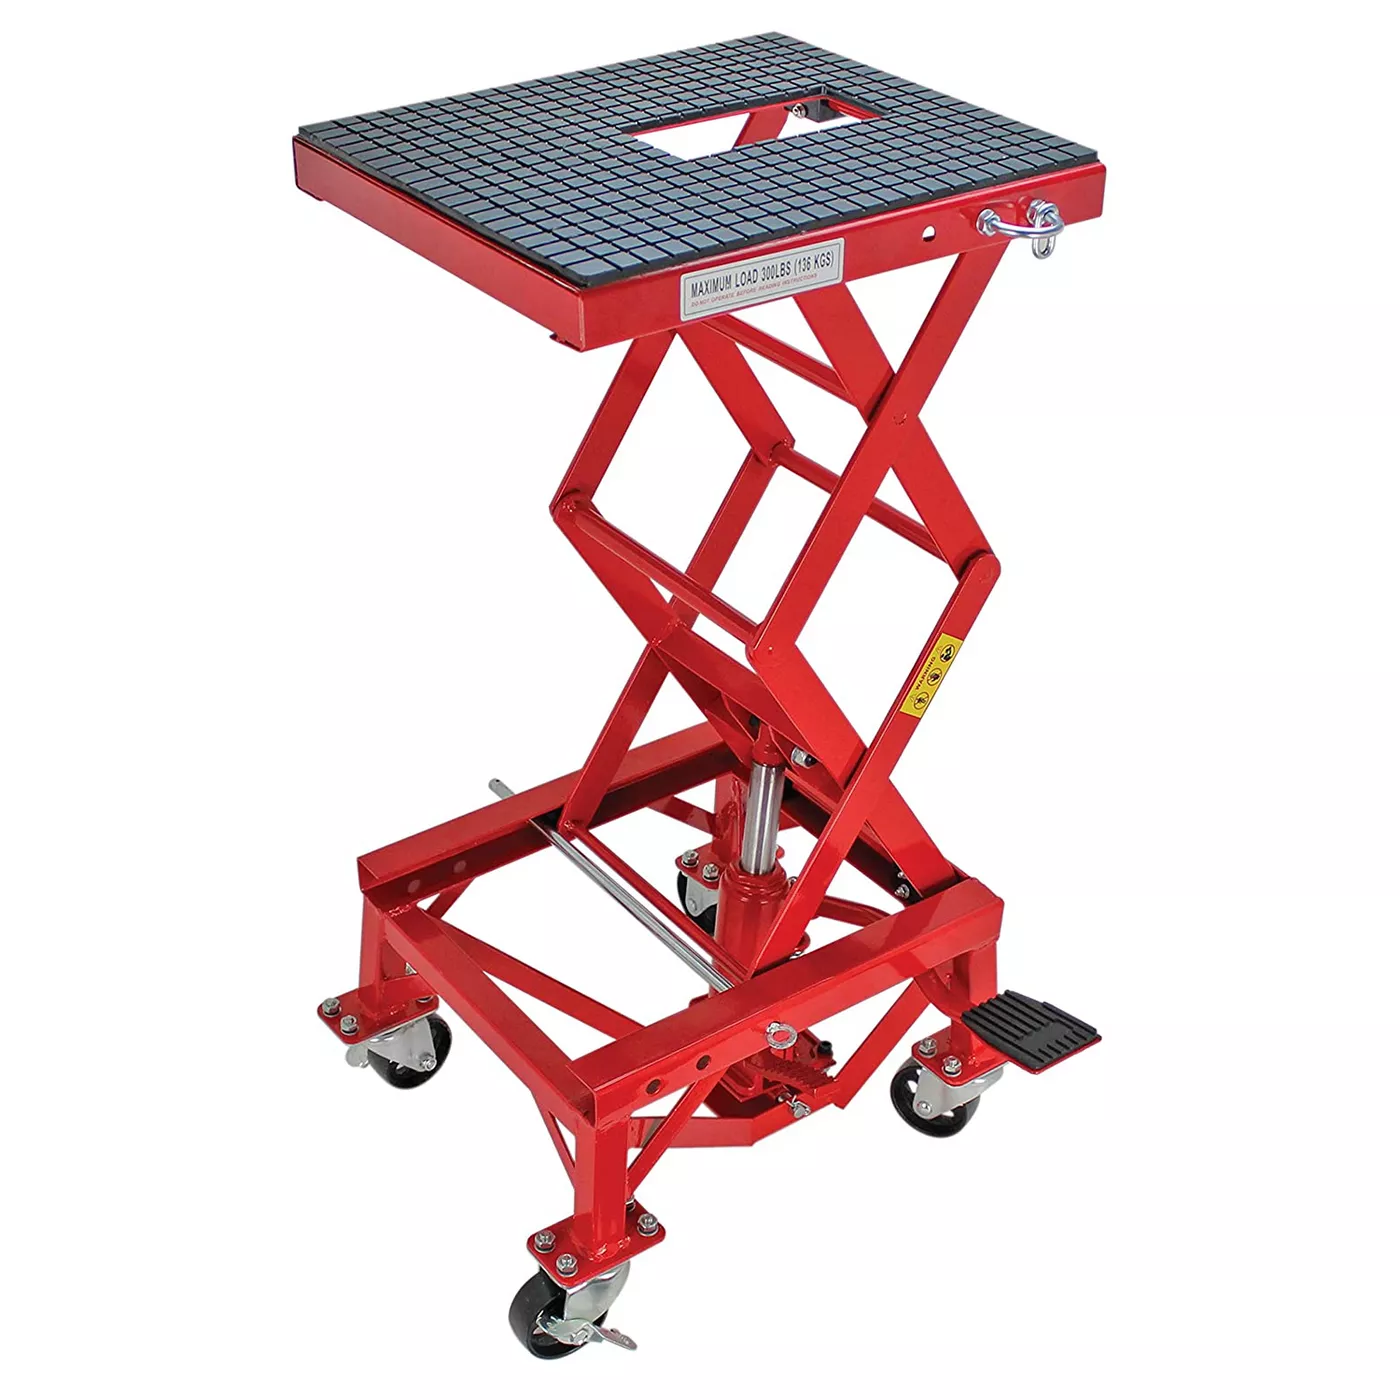 Hydraulic Motorcycle Lift Table at Target